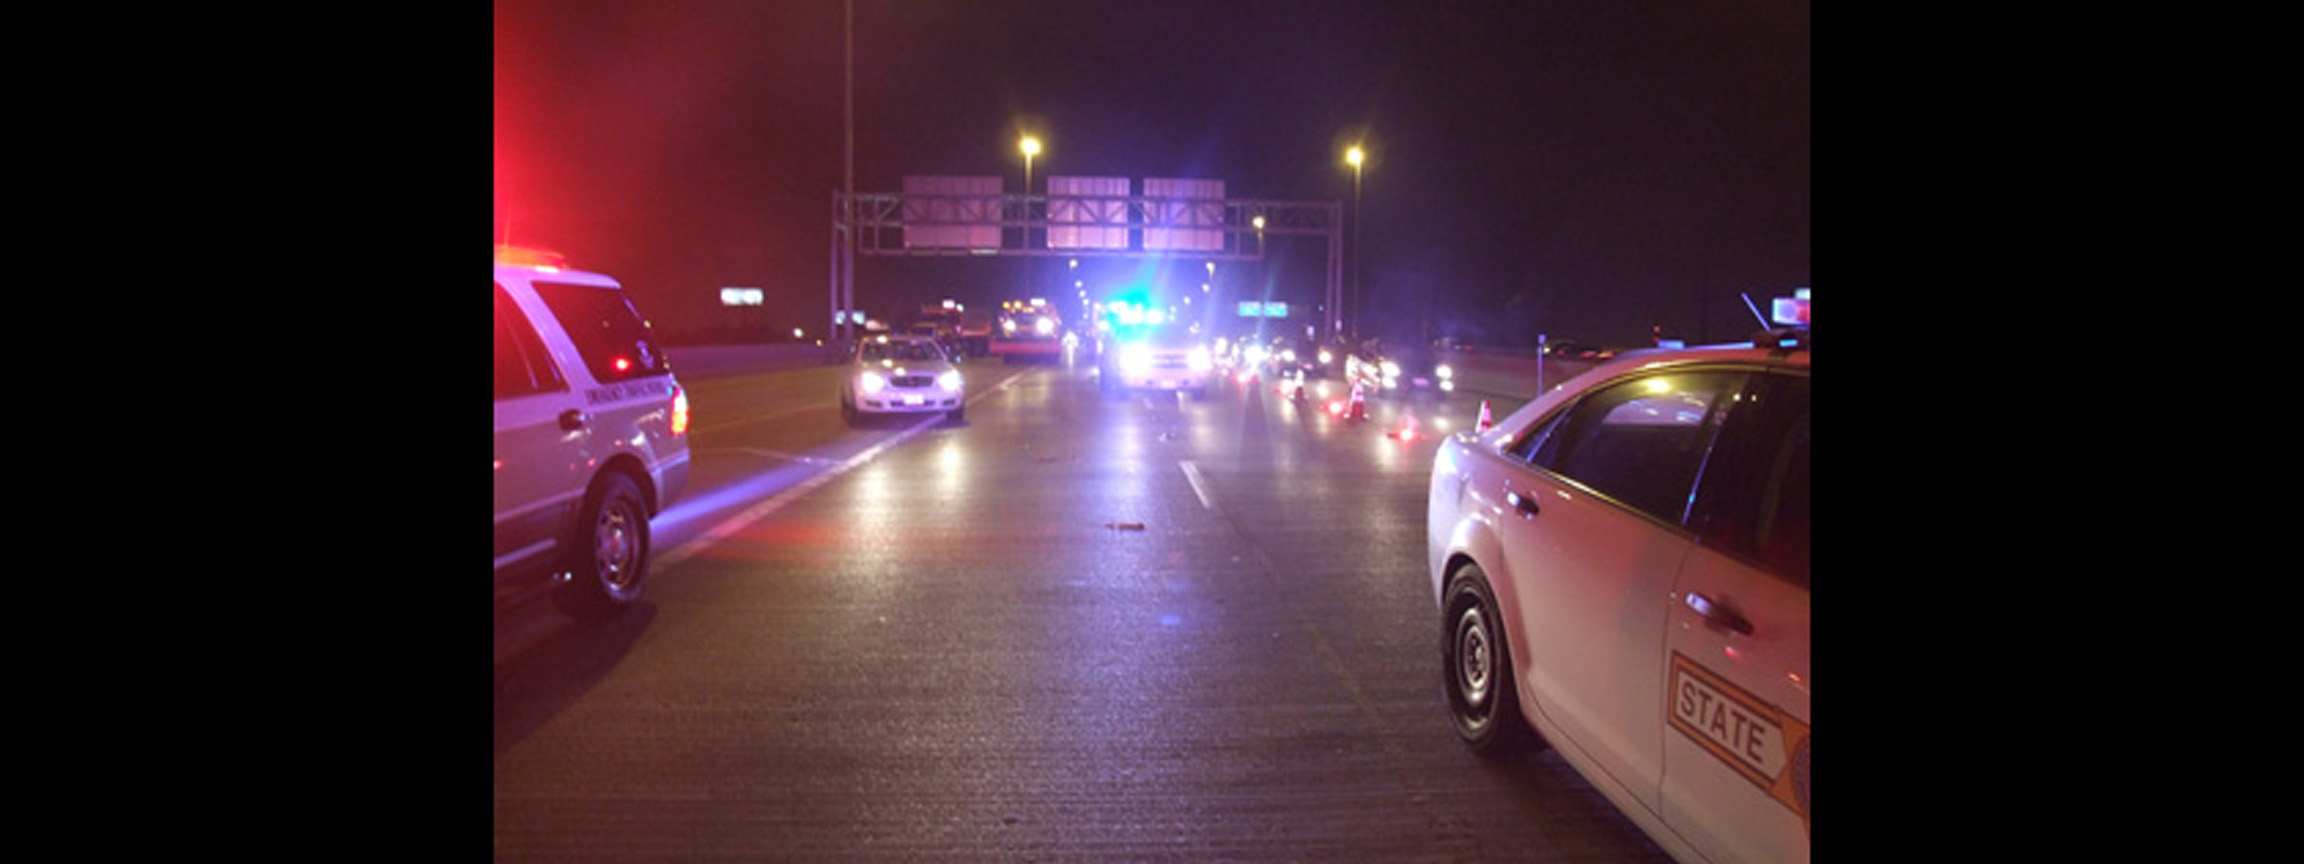 Squad Cars on Interstate at Night Tending to Accident